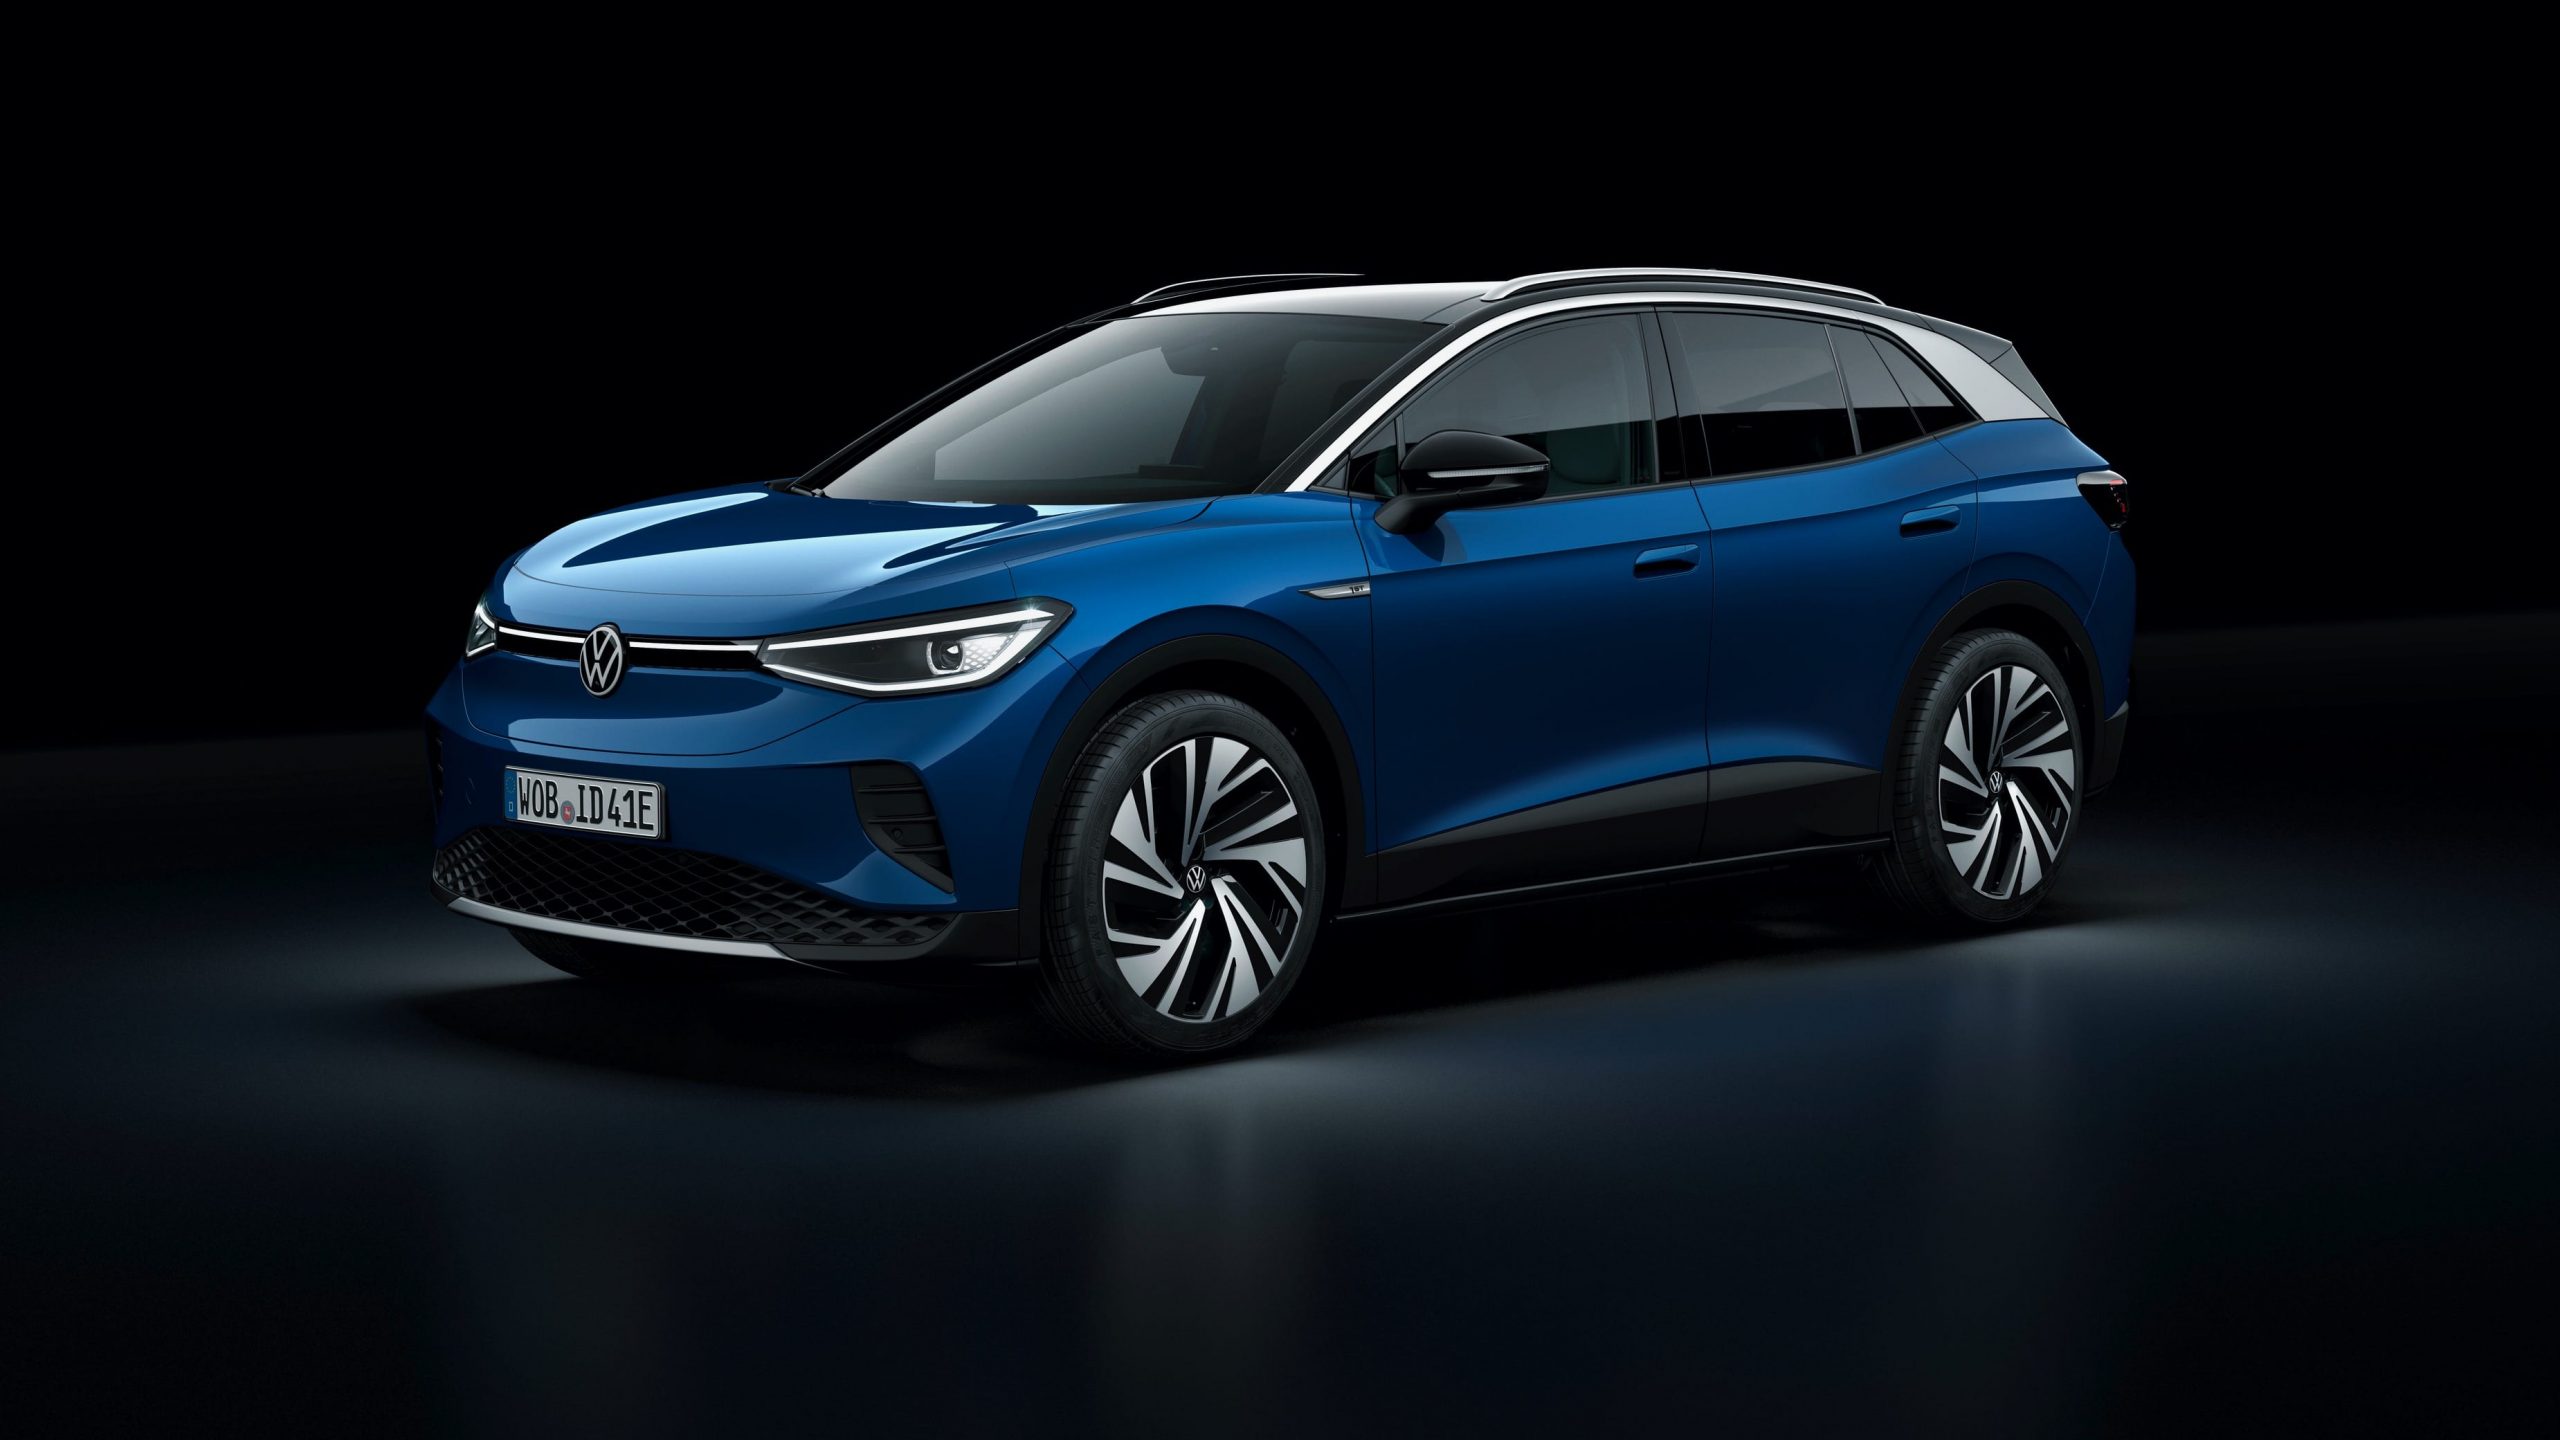 2021 Volkswagen ID.4: VW’s First Electric SUV Revealed | DiscoverAuto